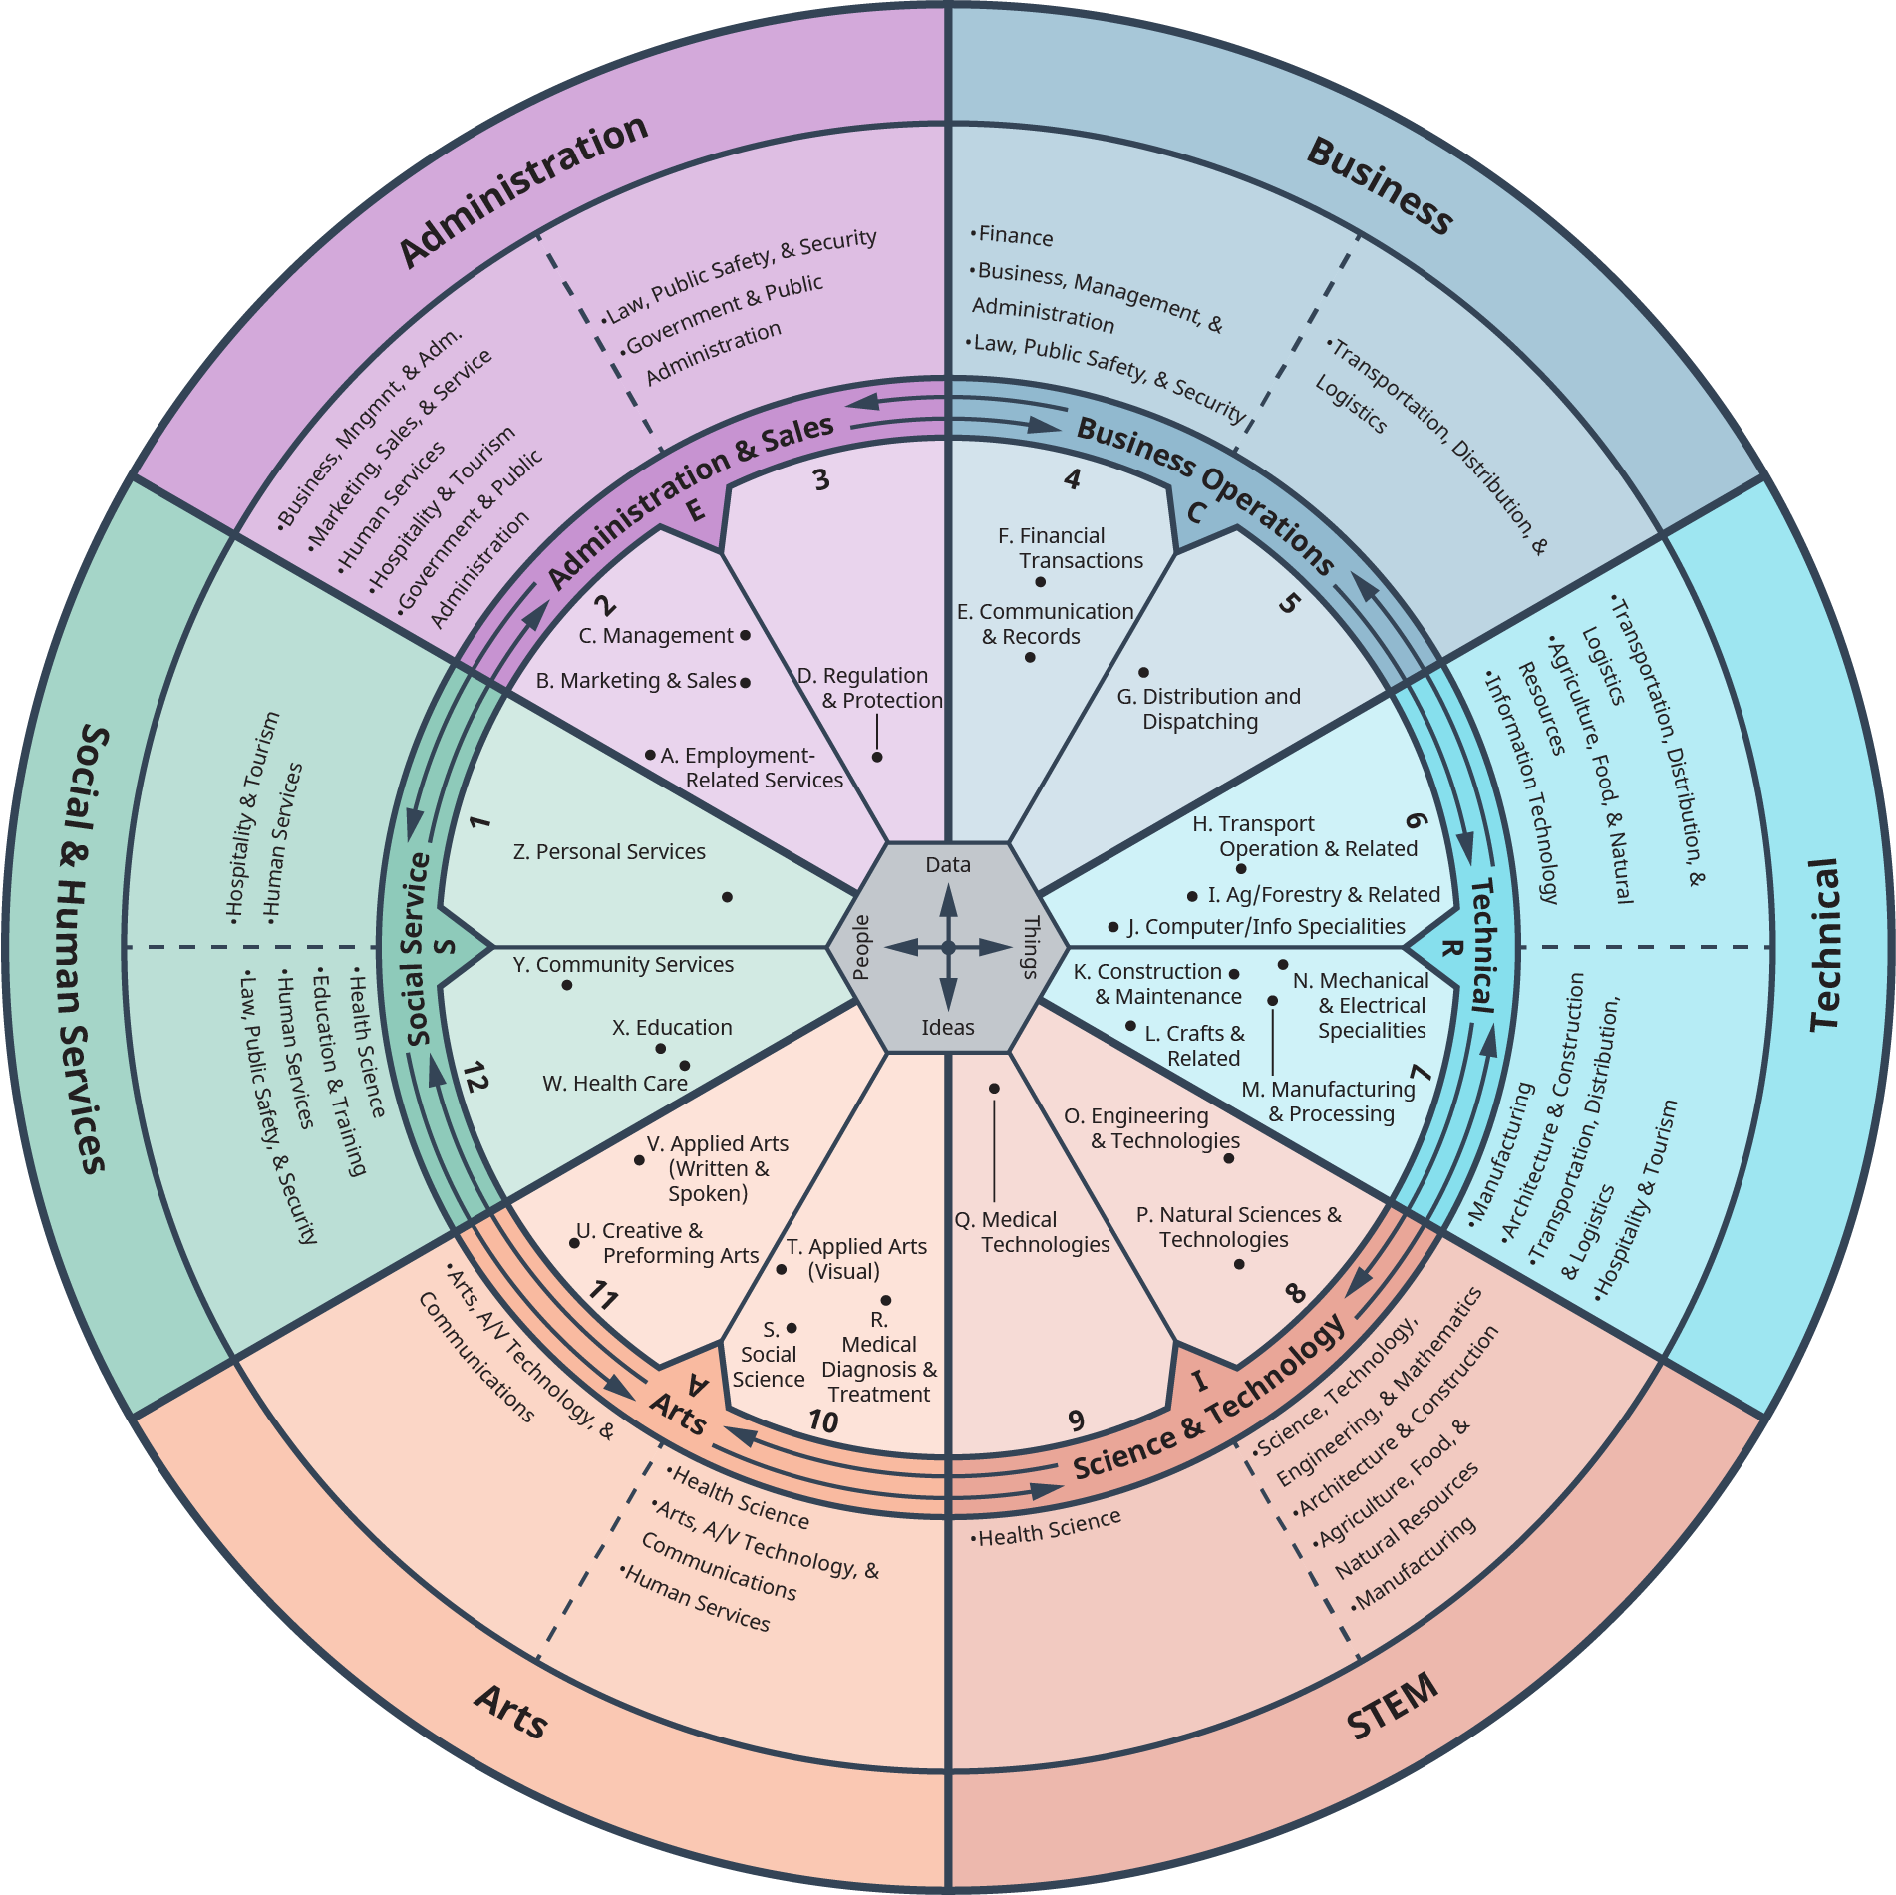 A multilayer pie diagram illustrates the components under “Administration,” “Business,” “Technical,” “Stem,” Arts,” and “Social and Human Services.”